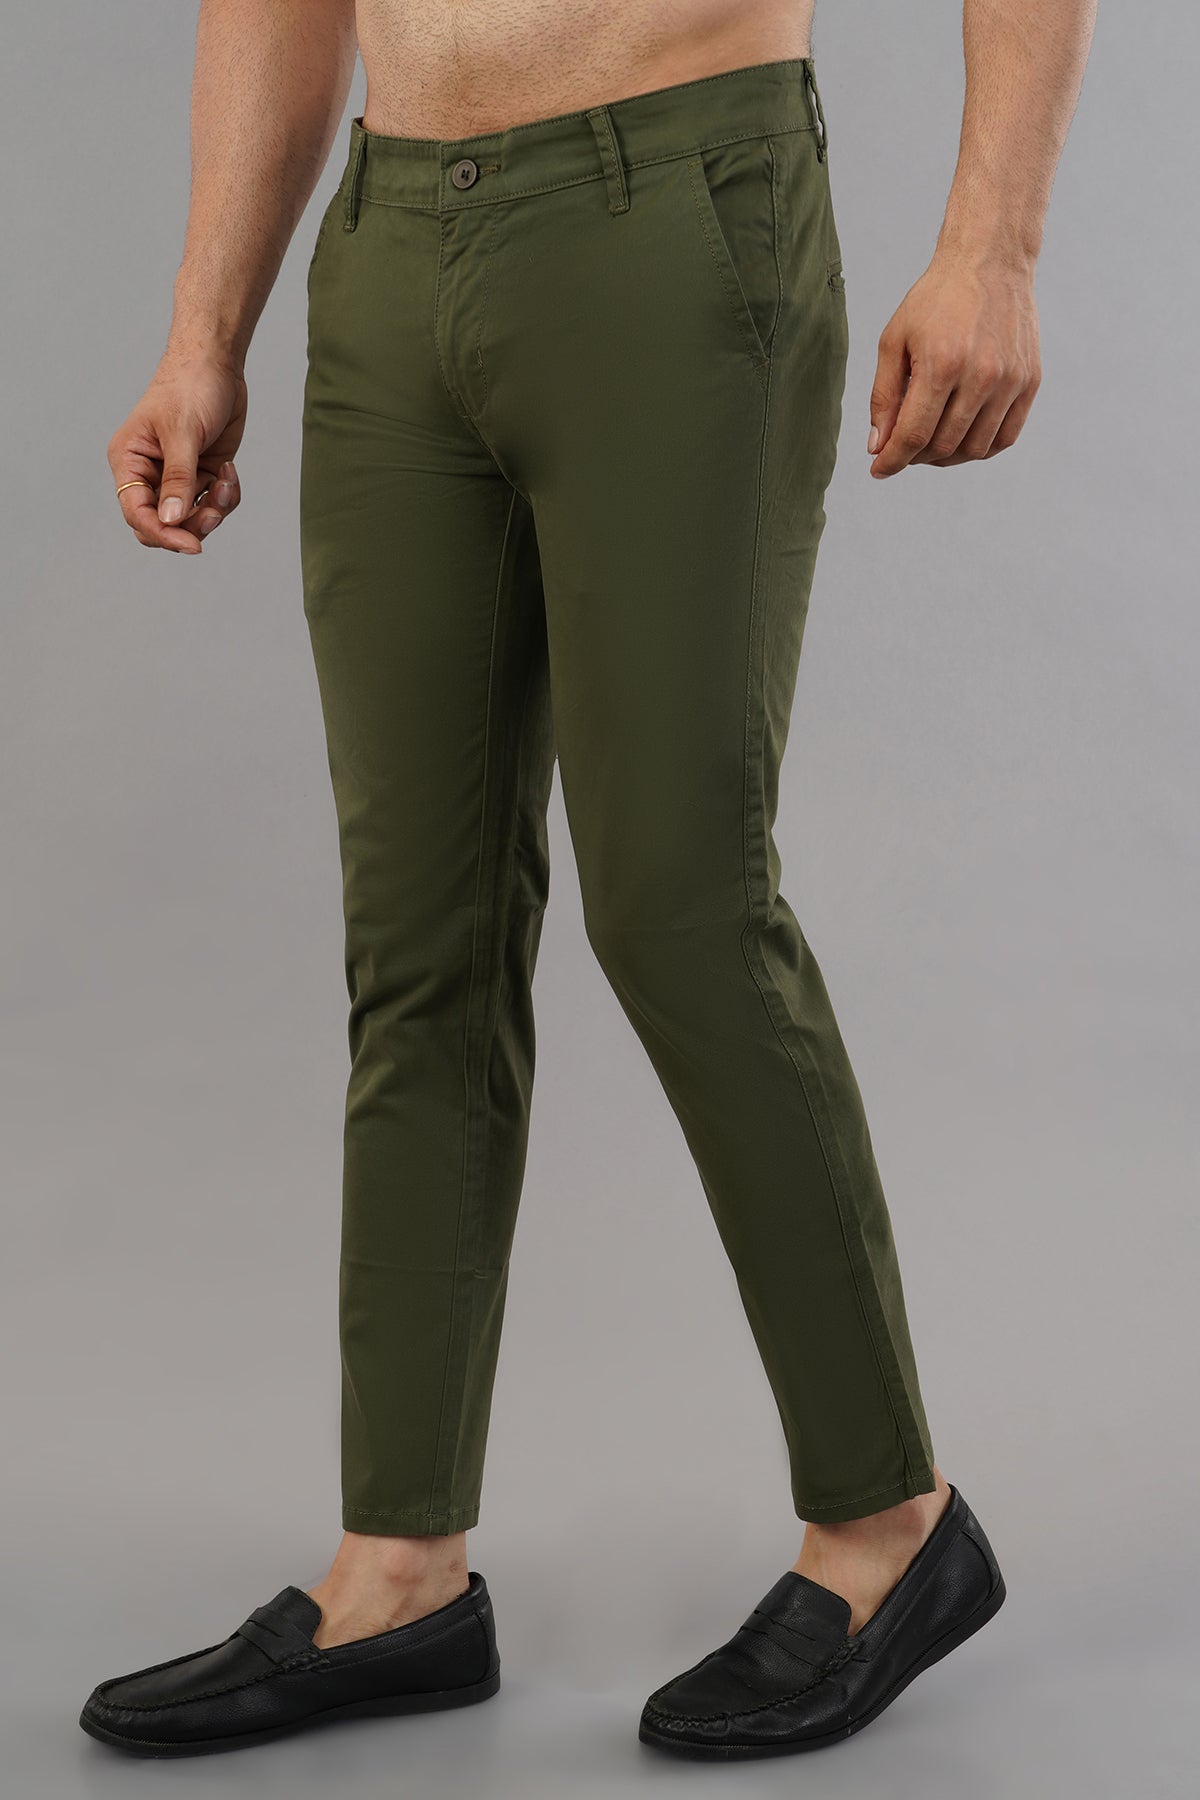 MENS ARMY GREEN CROPPED CHINOS